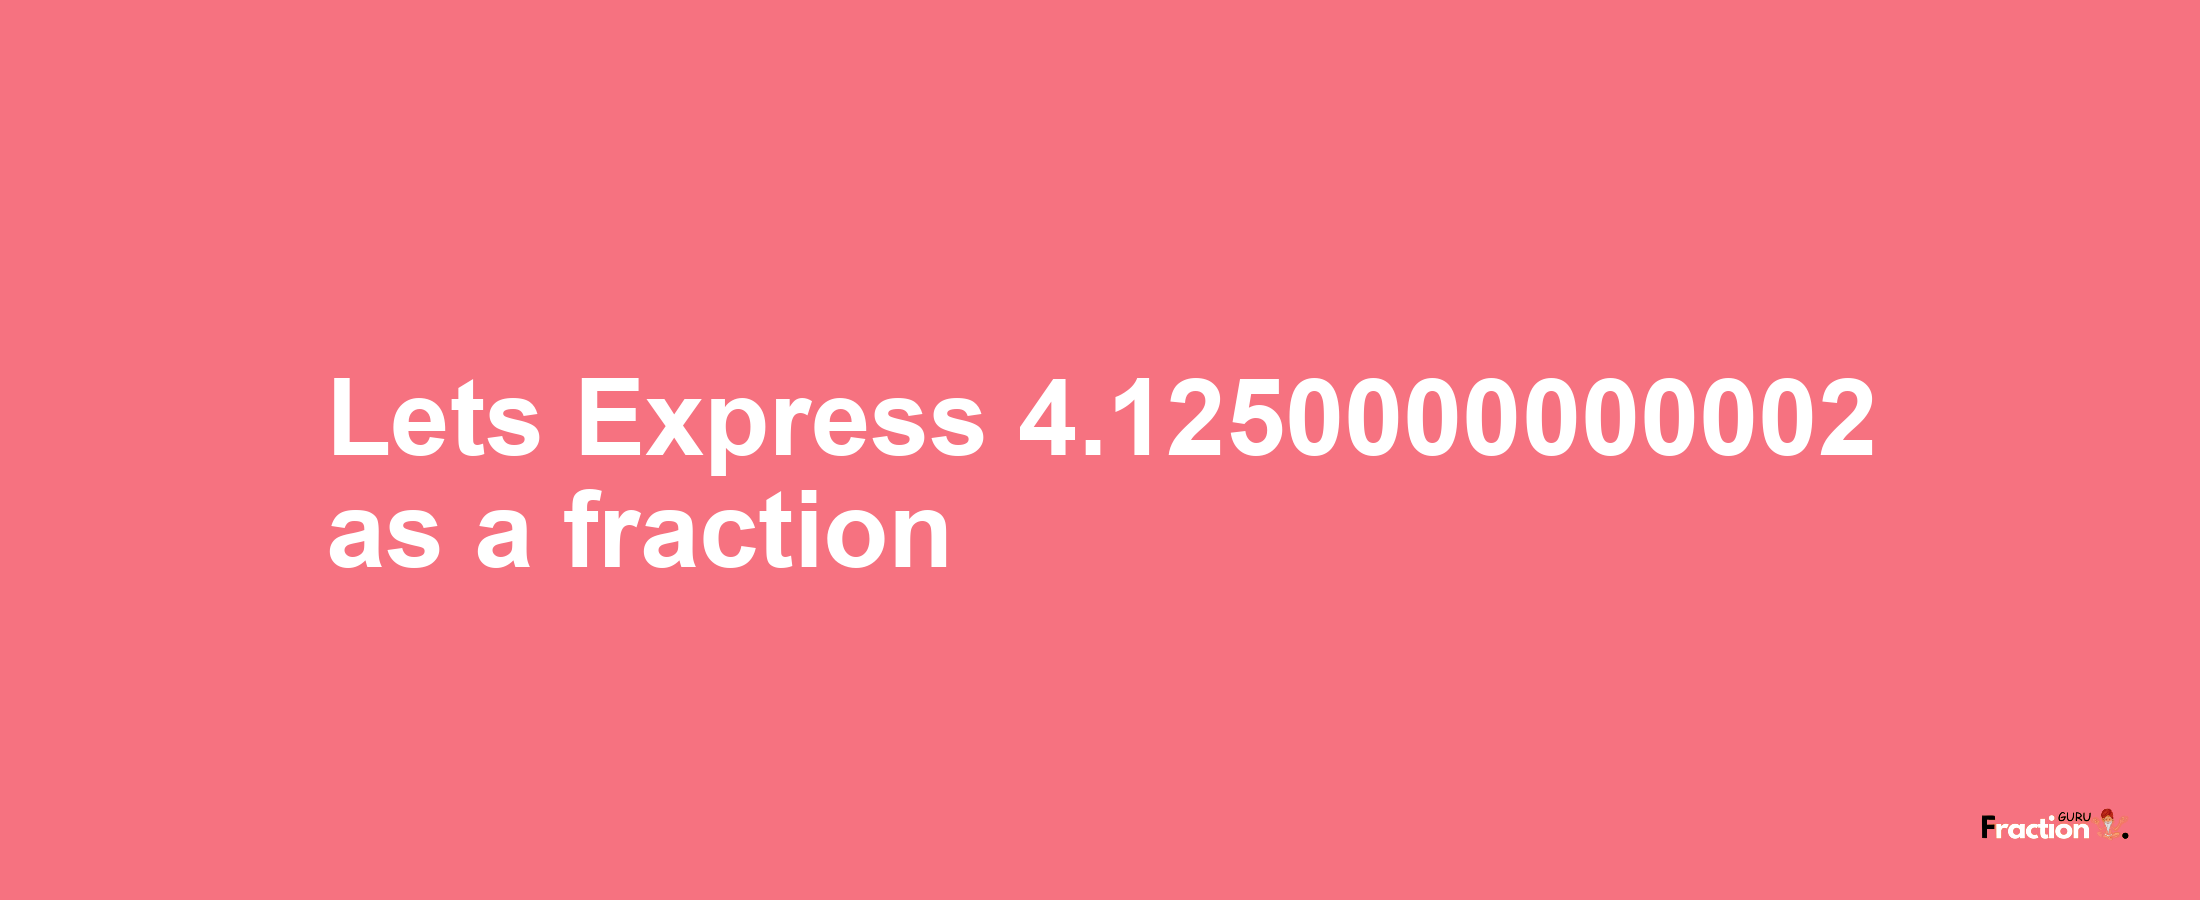 Lets Express 4.1250000000002 as afraction